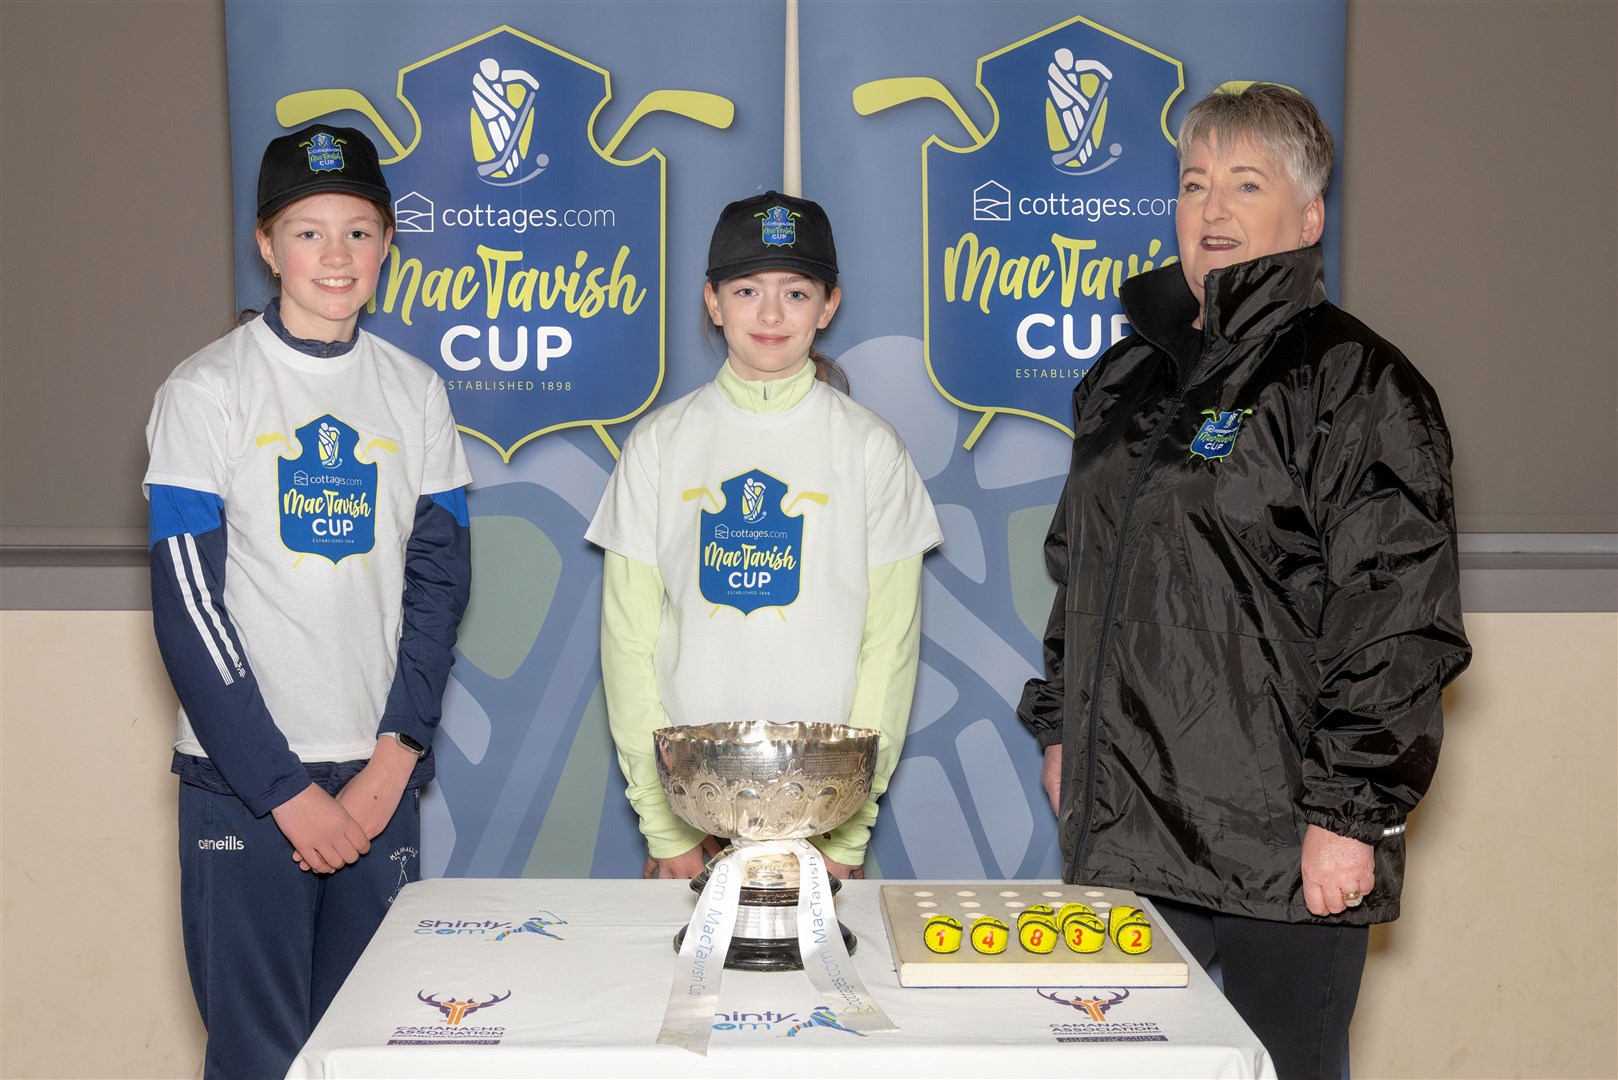 Maisie Ewing and Taylor Cameron, two attendees at a Camanachd Association girls camp at Kirkhill, along with Heather Grant, Business Development Manager for cottages.com made the draw.